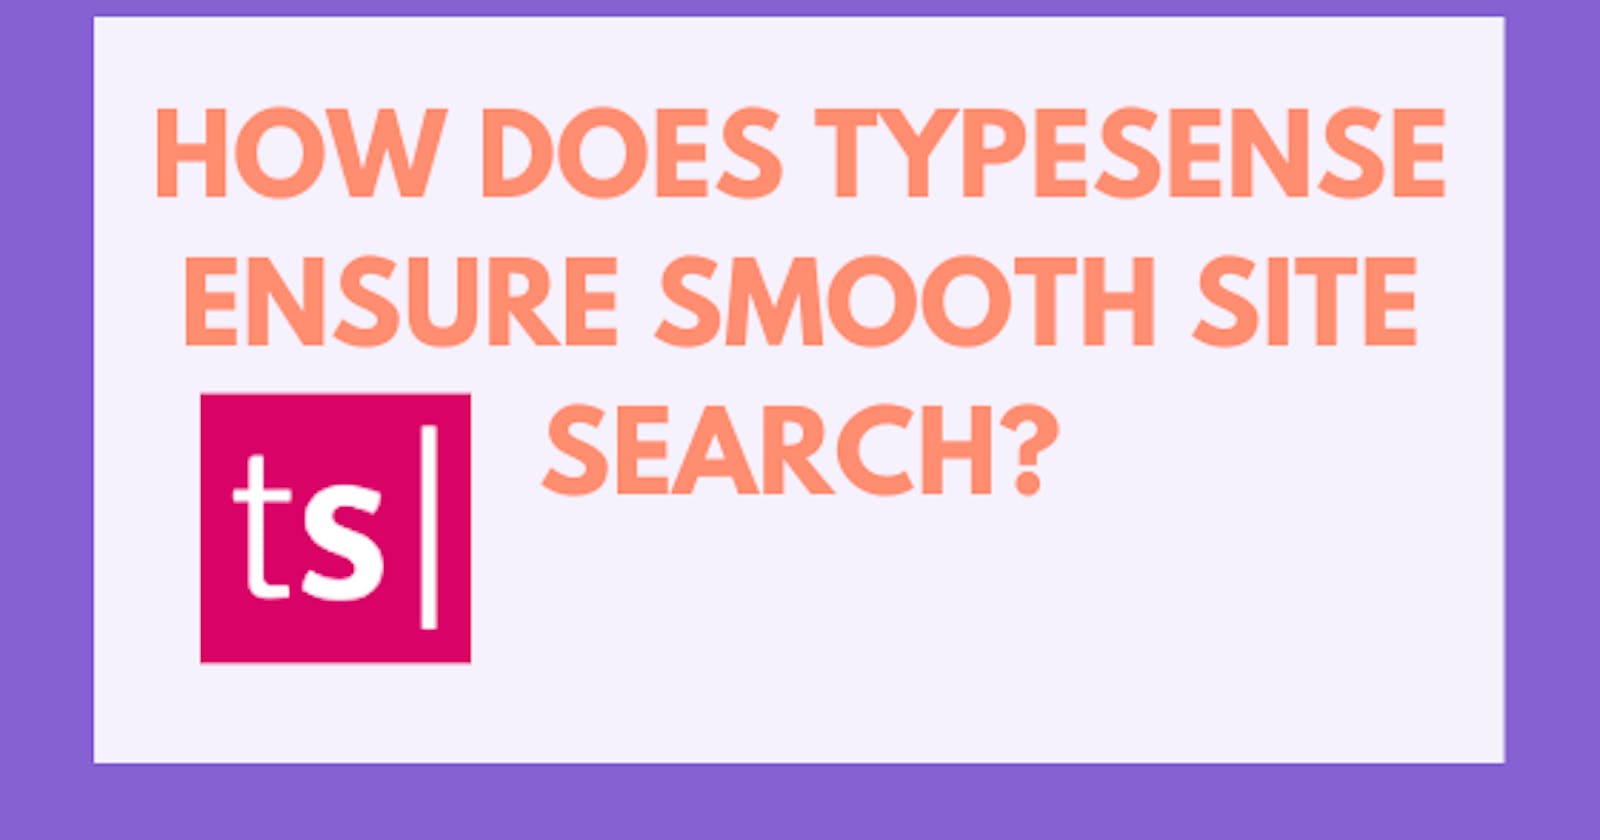 Using Typesense search engine on your site